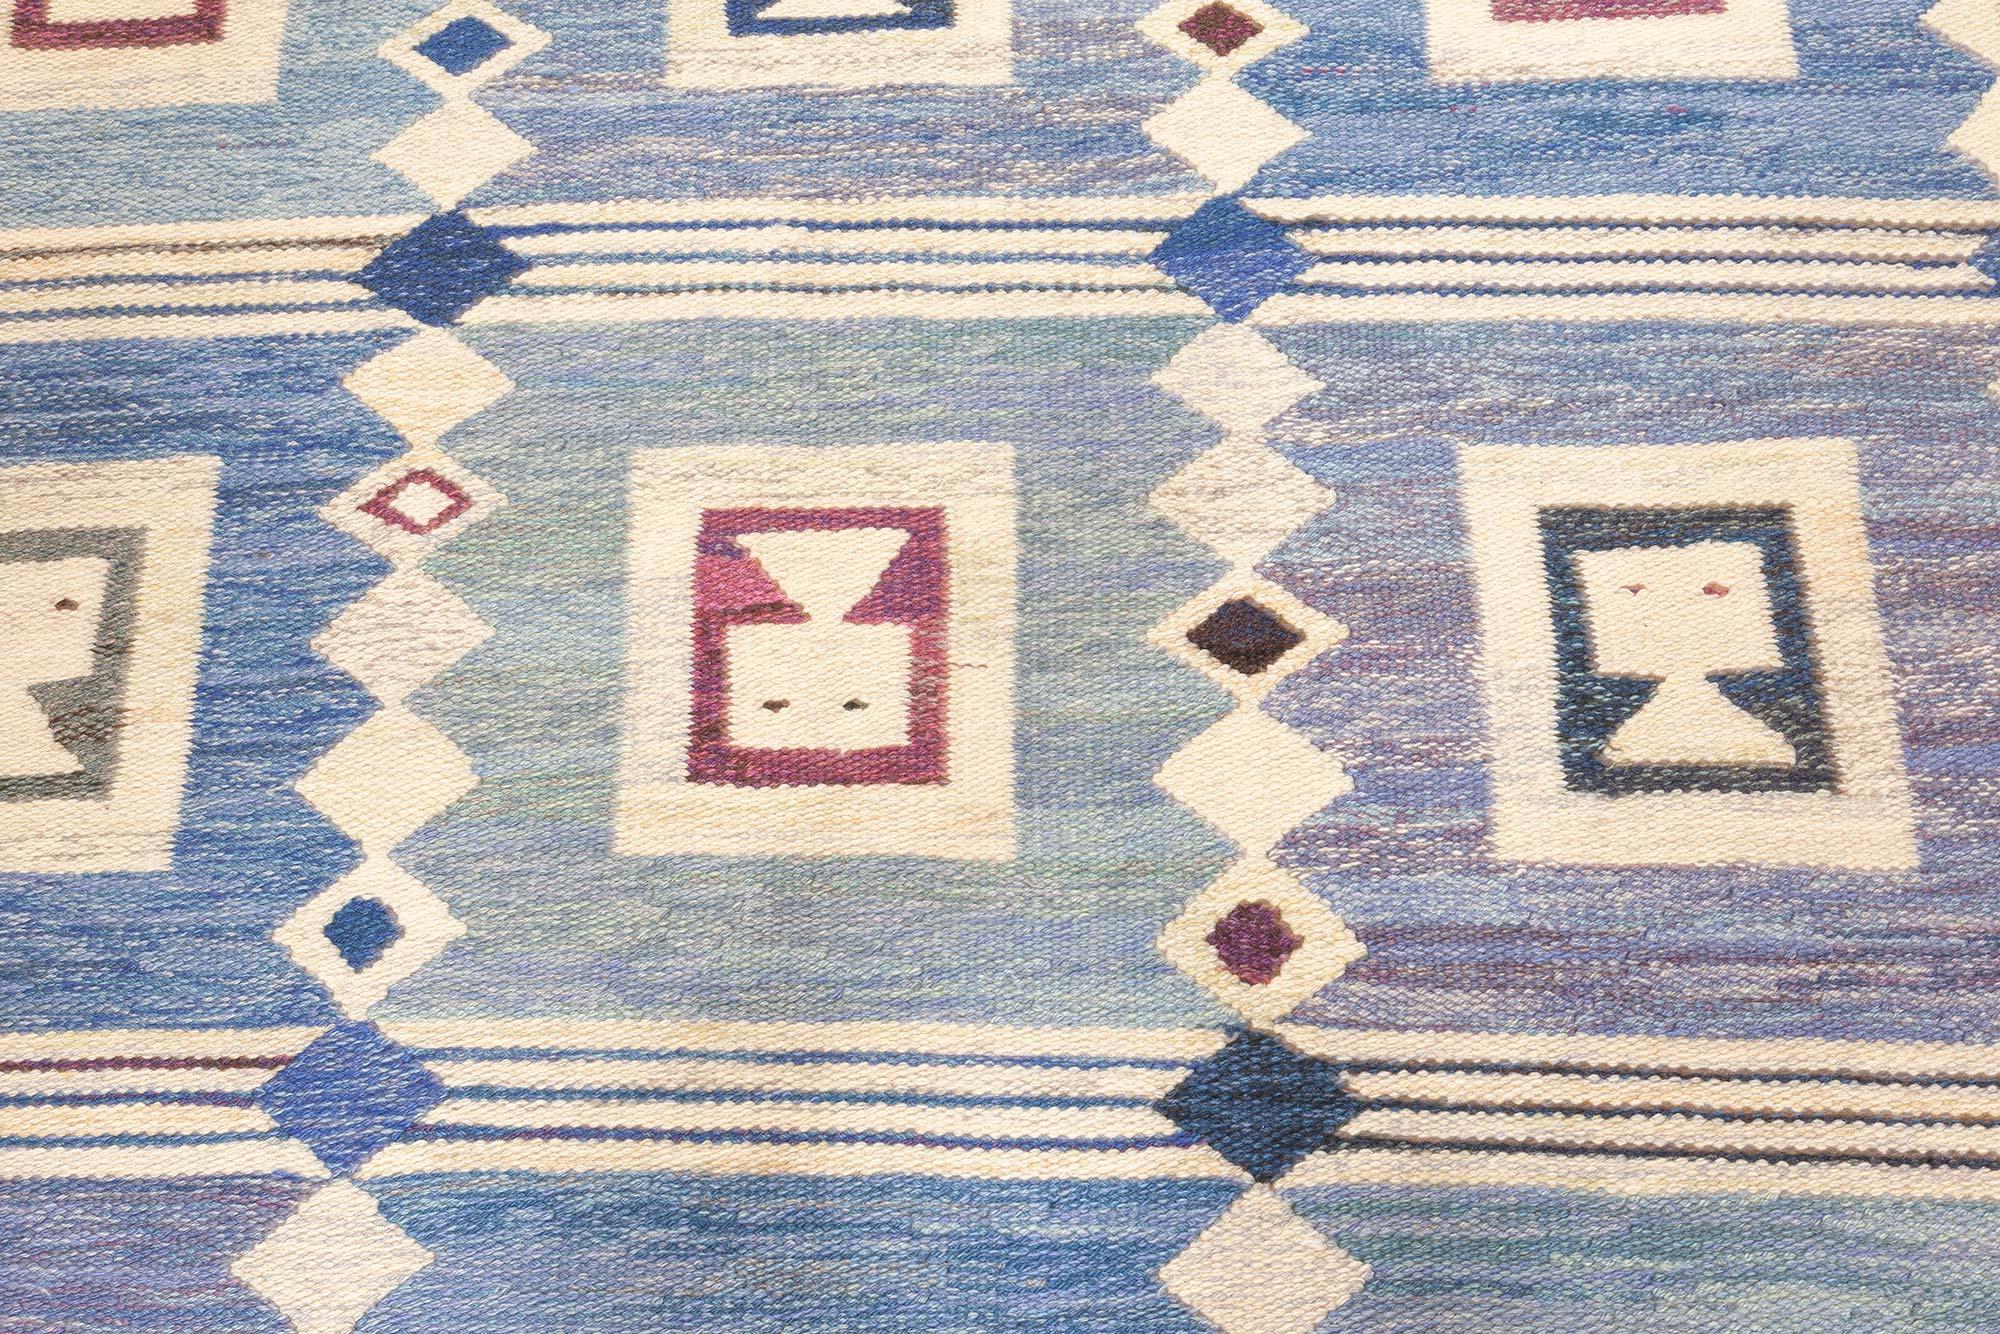 Vintage Swedish Flat Weave Rug “The Girls in the Window” Designed by Edna Martin
Size: 5'1